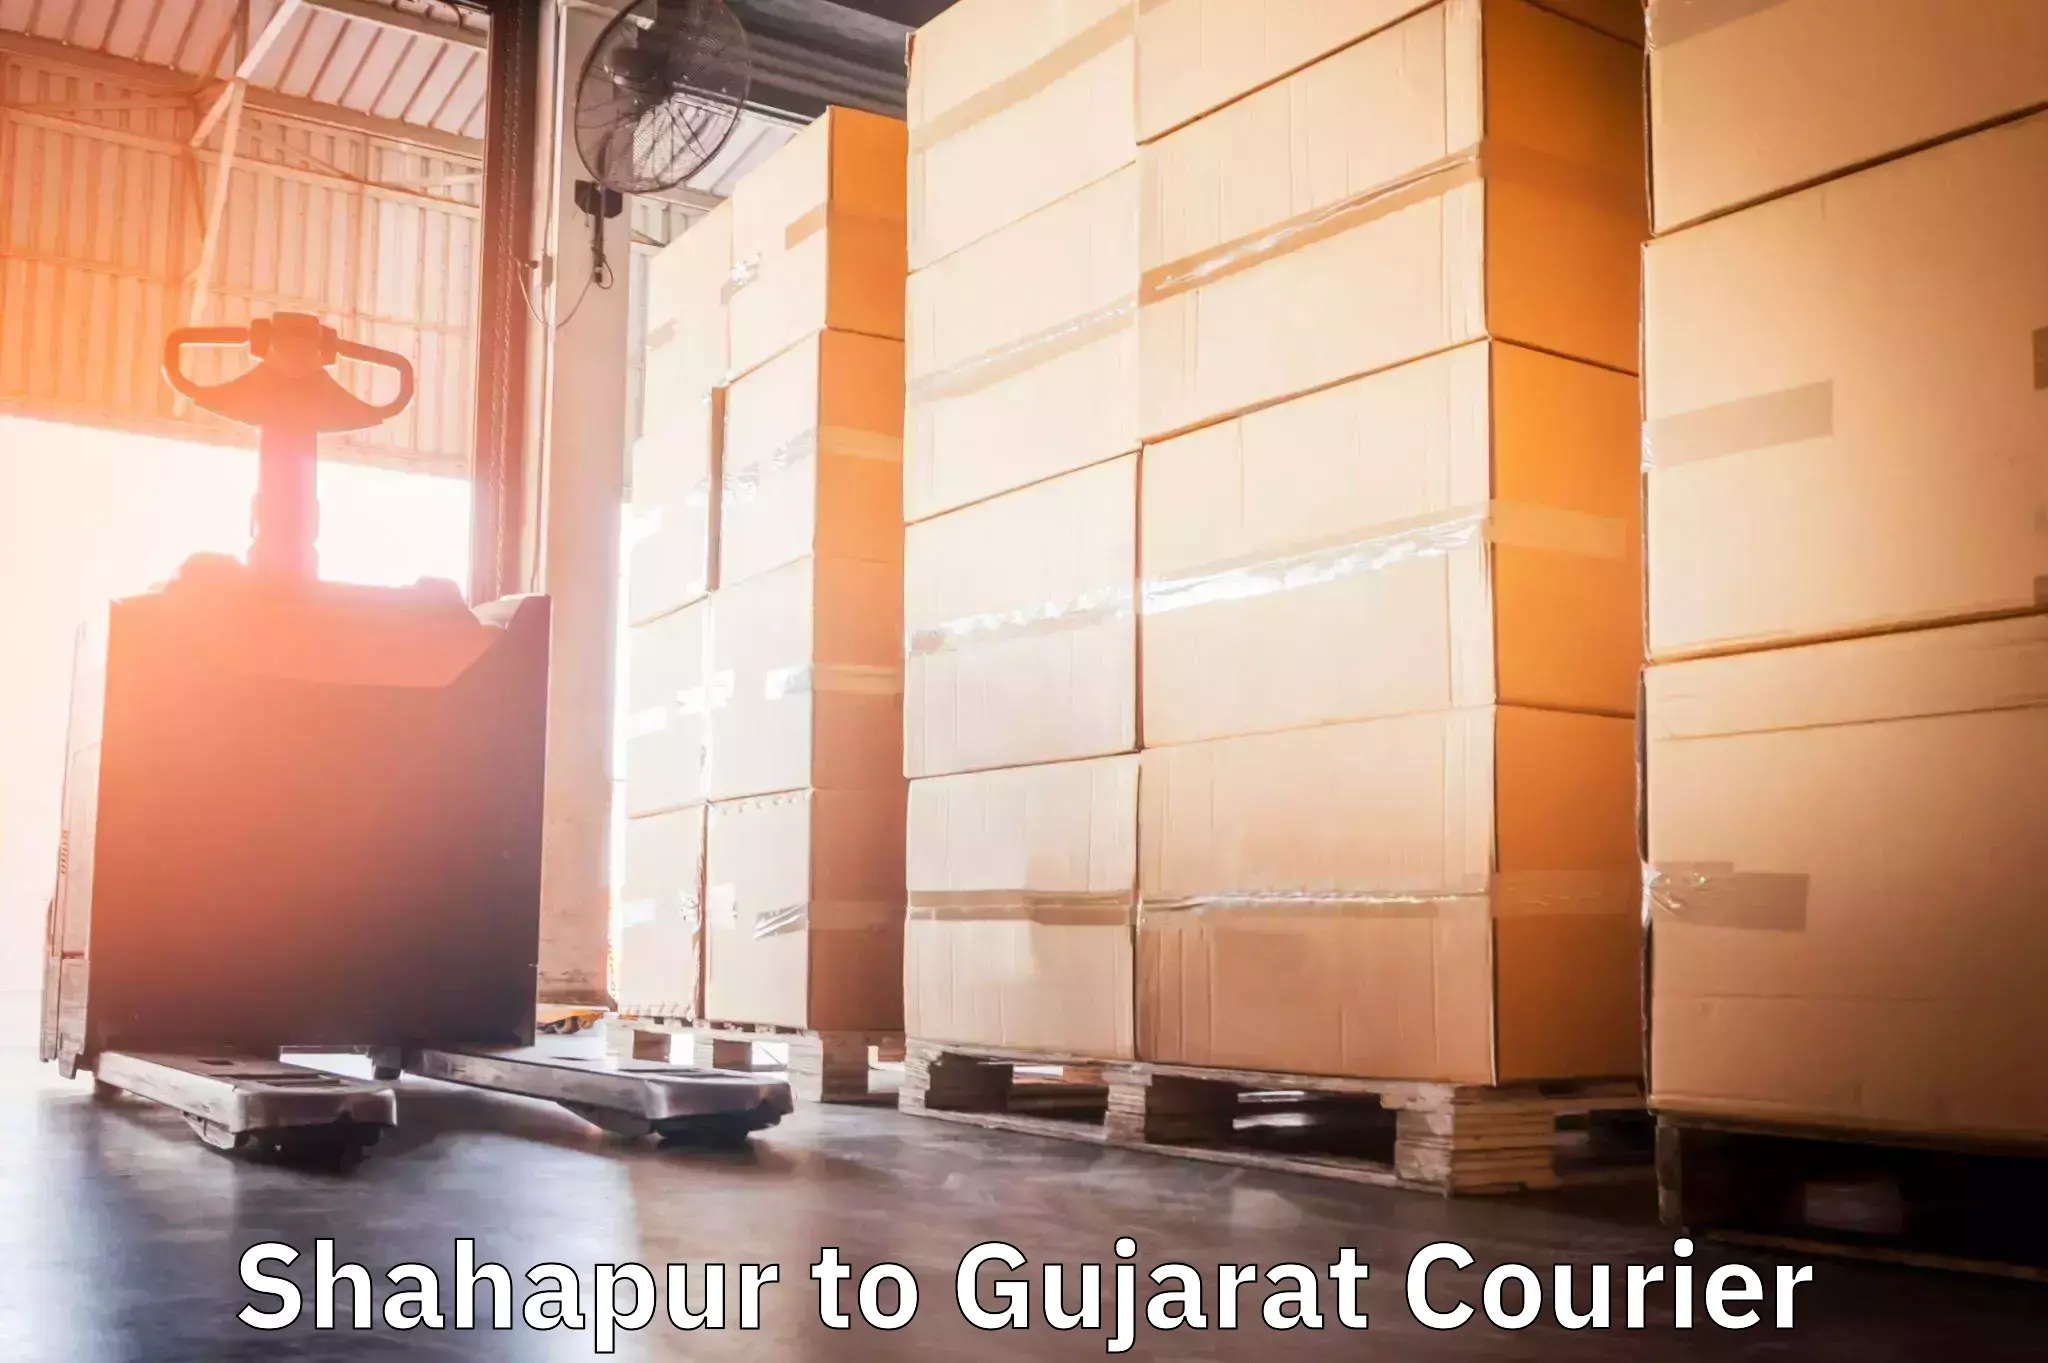 Courier service booking in Shahapur to Gujarat